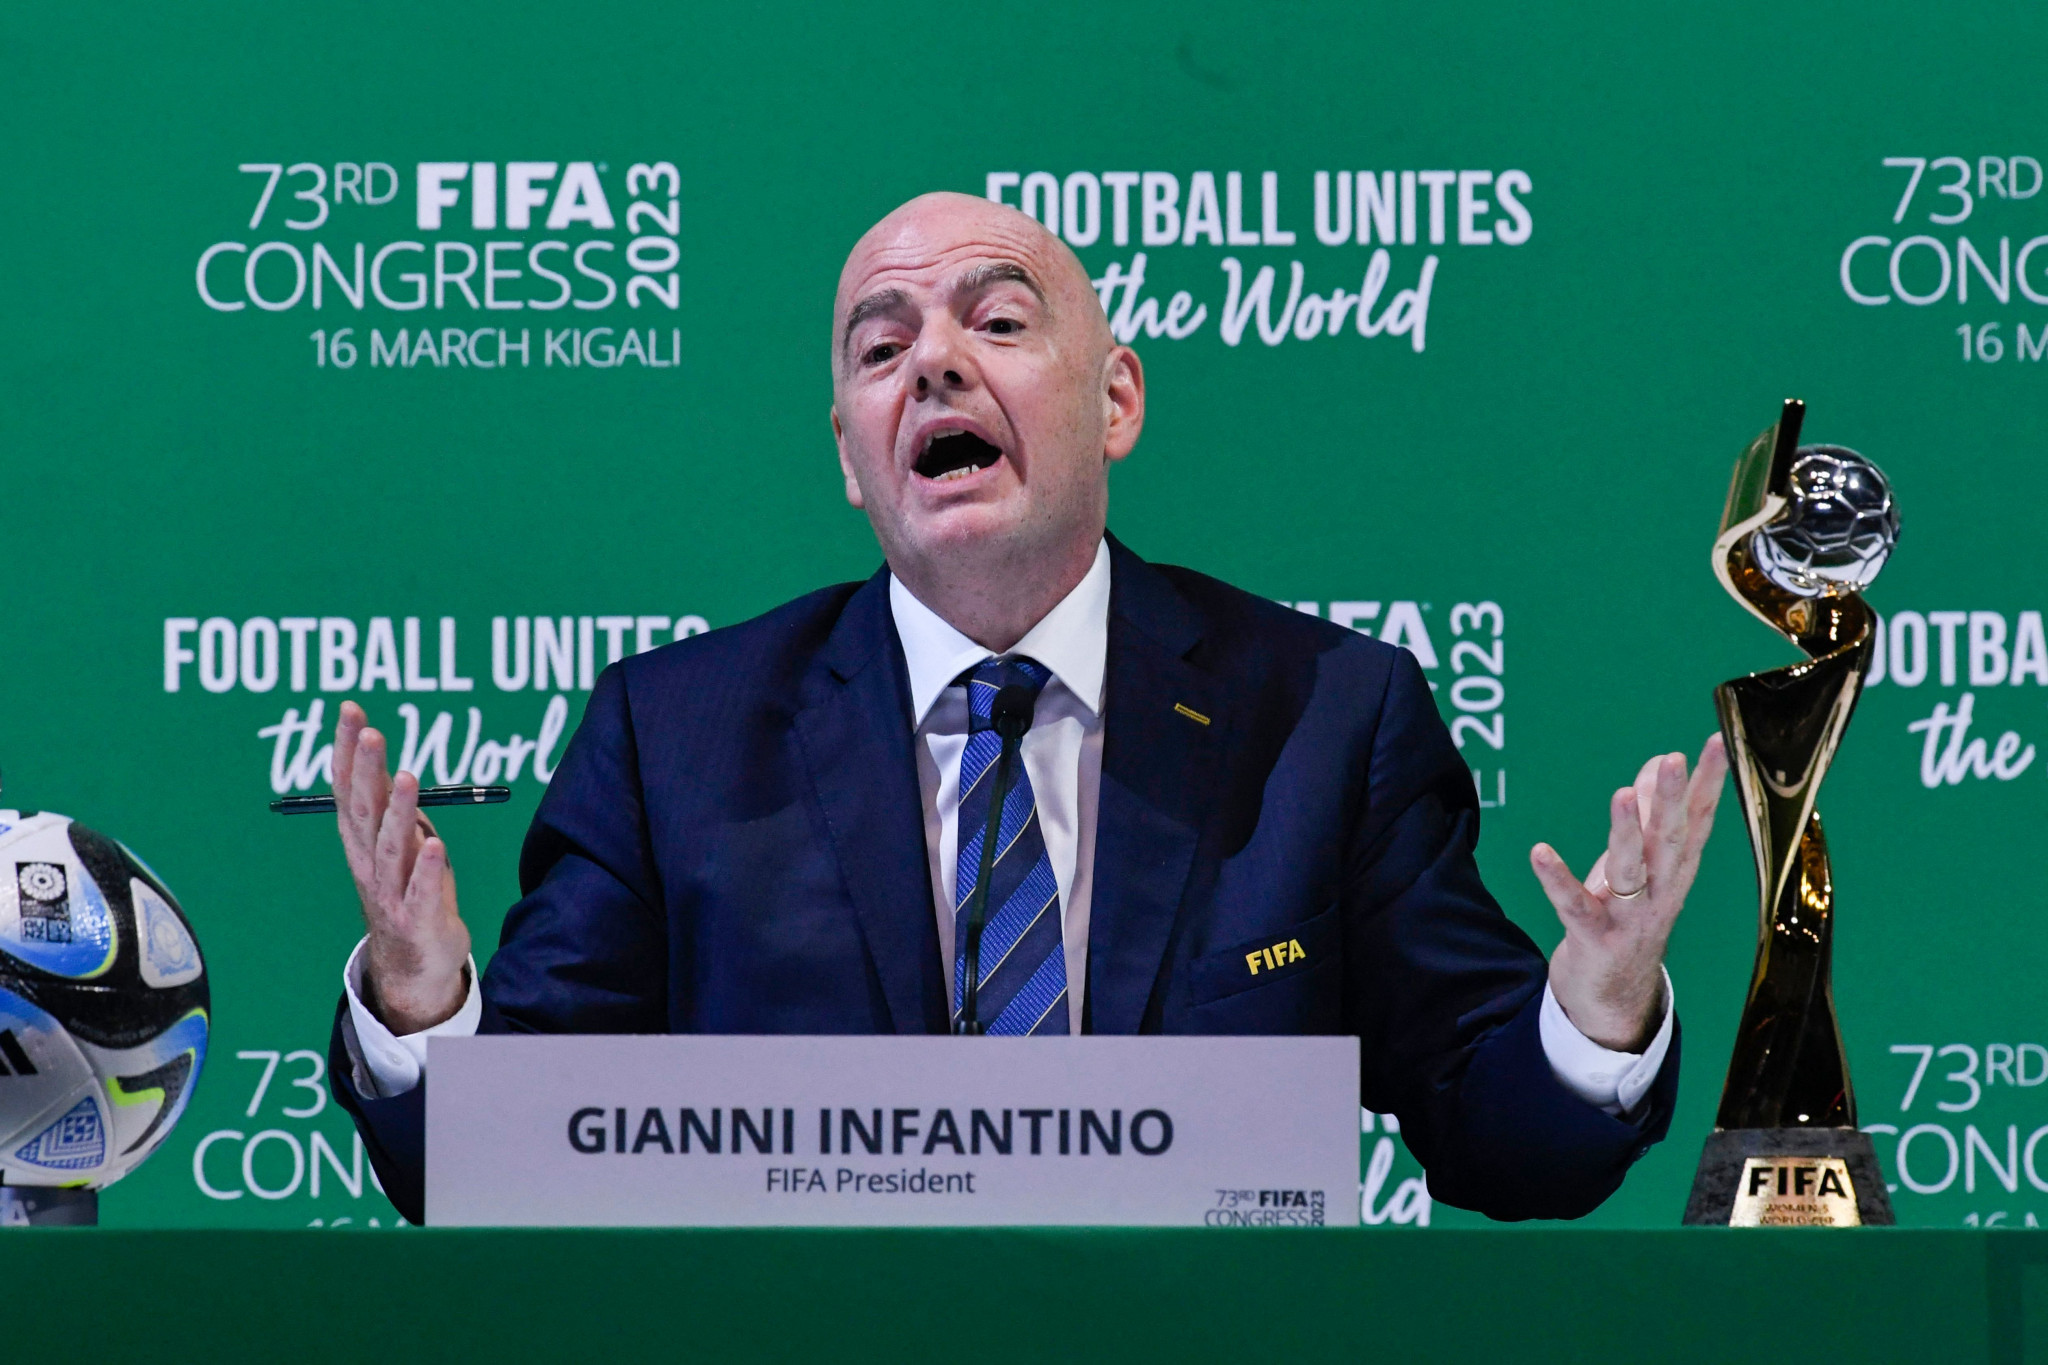 In his Presidential address at the Congress, Infantino appeared to claim he drew inspiration for his 2016 Presidential election victory from Rwanda's response to the 1994 genocide ©Getty Images